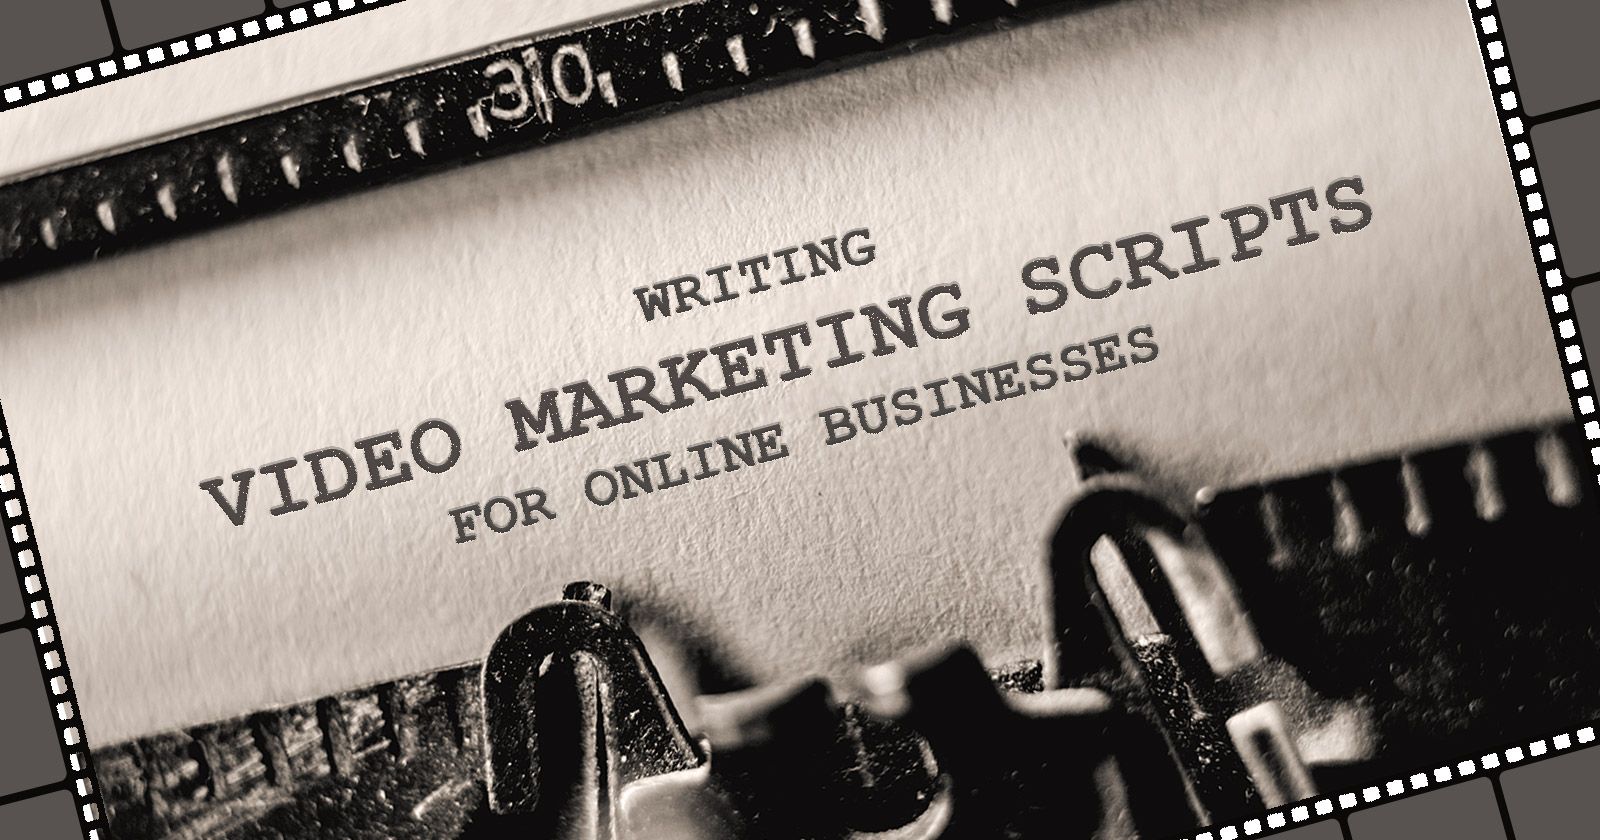 Tips for writing video marketing scripts for online business